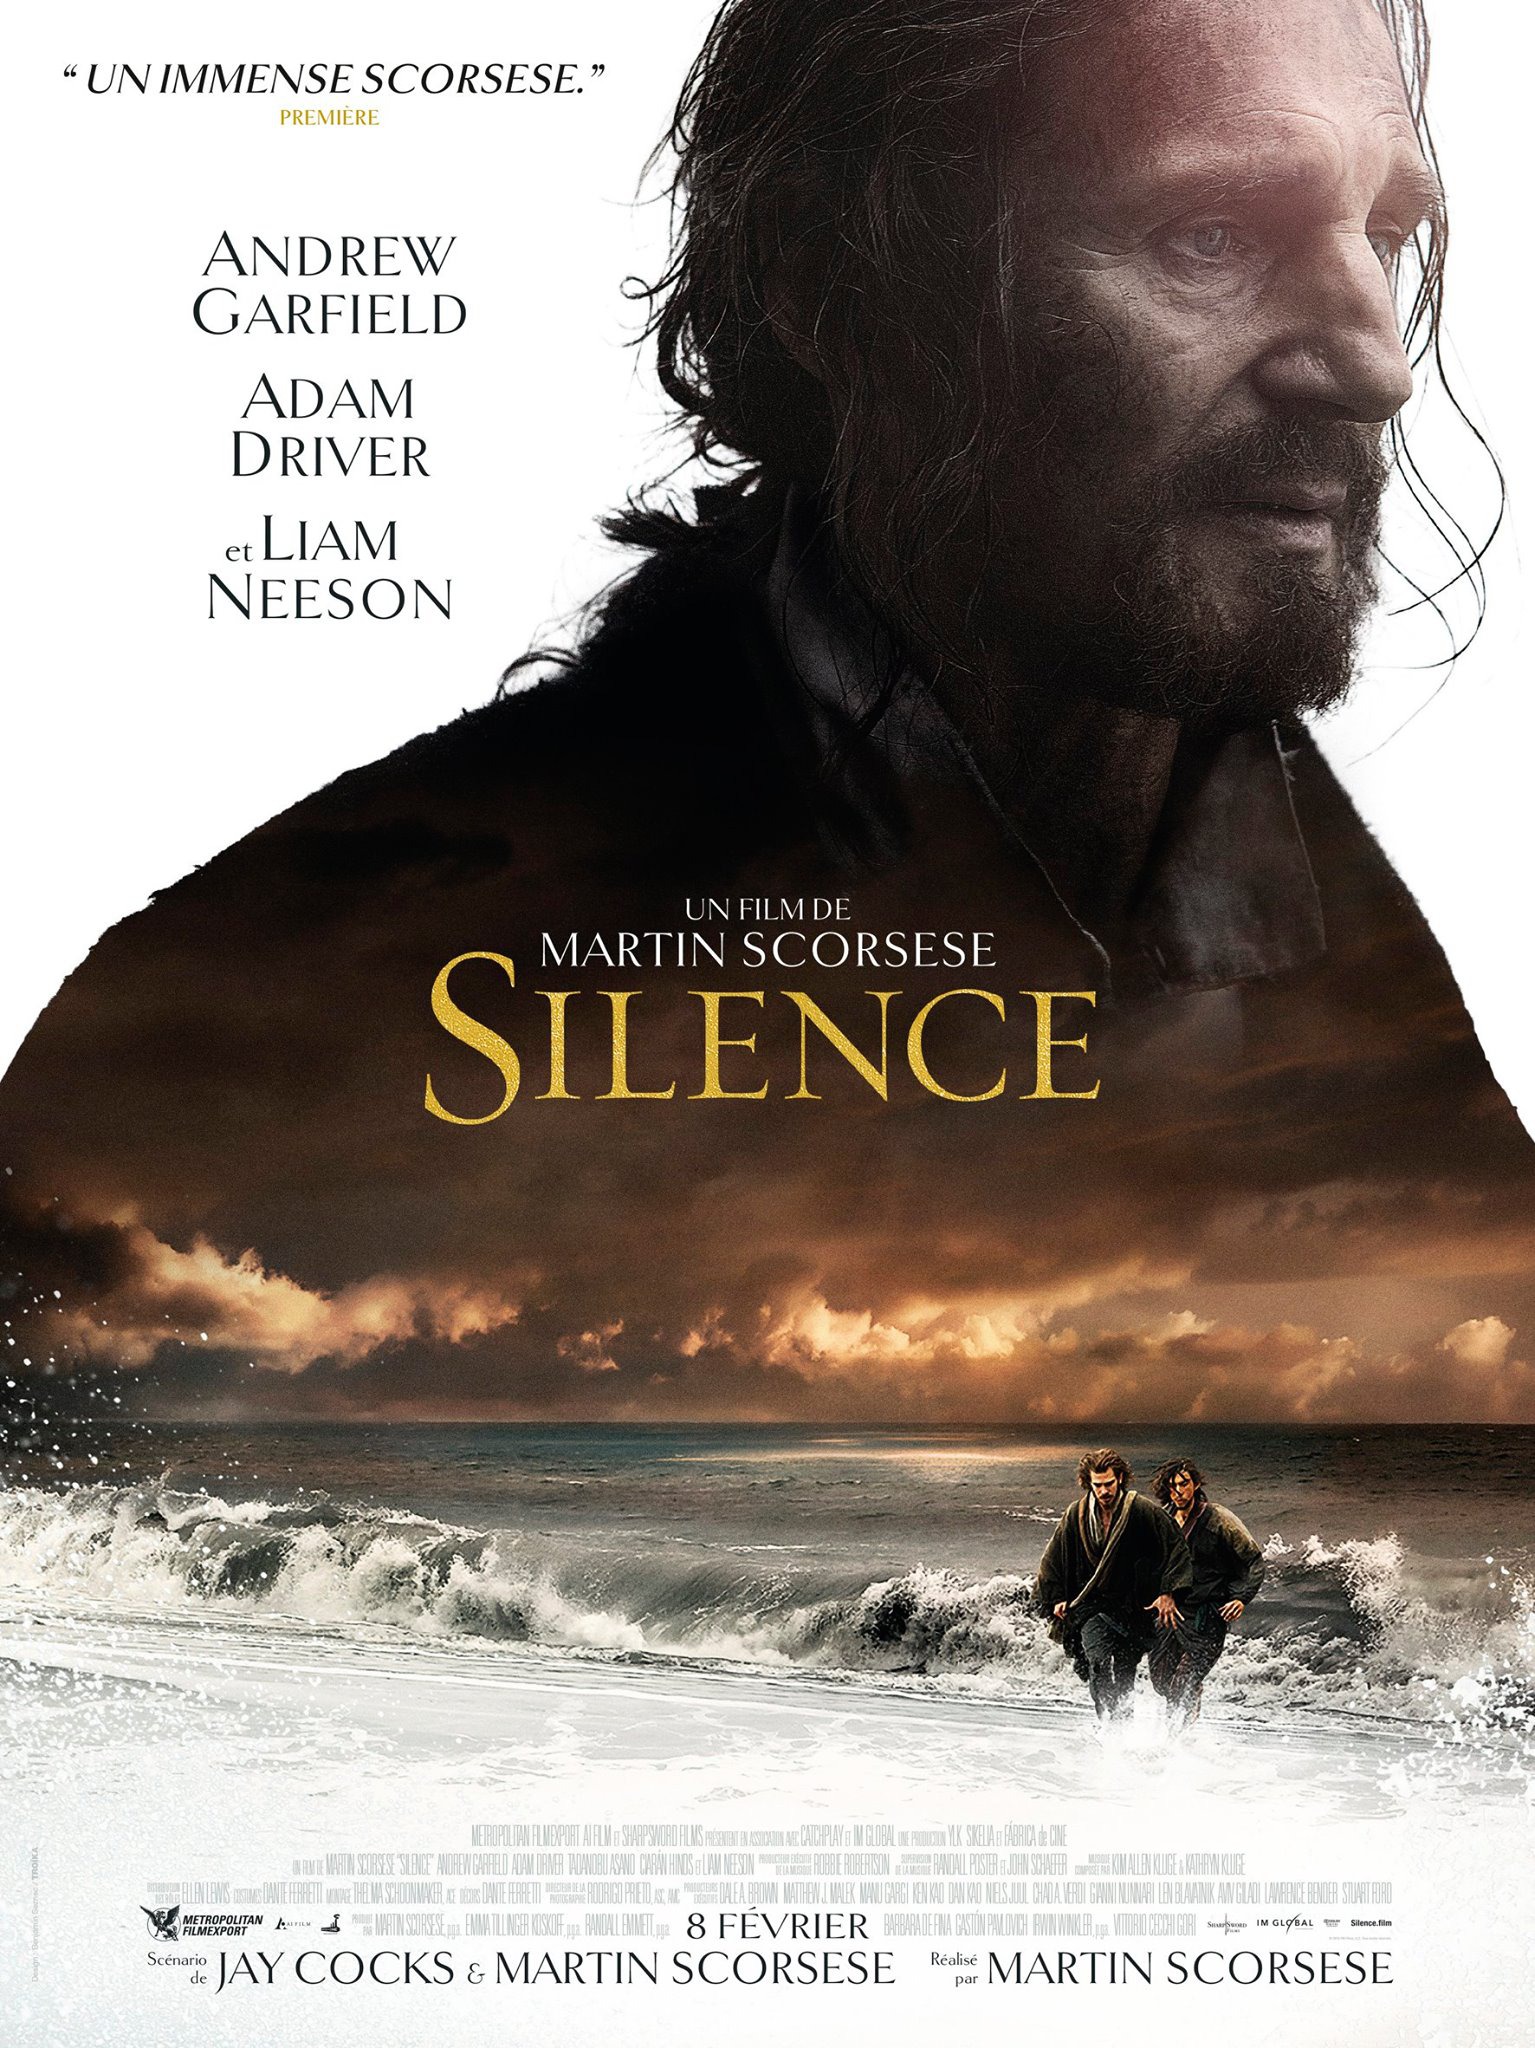 Mega Sized Movie Poster Image for Silence (#4 of 4)